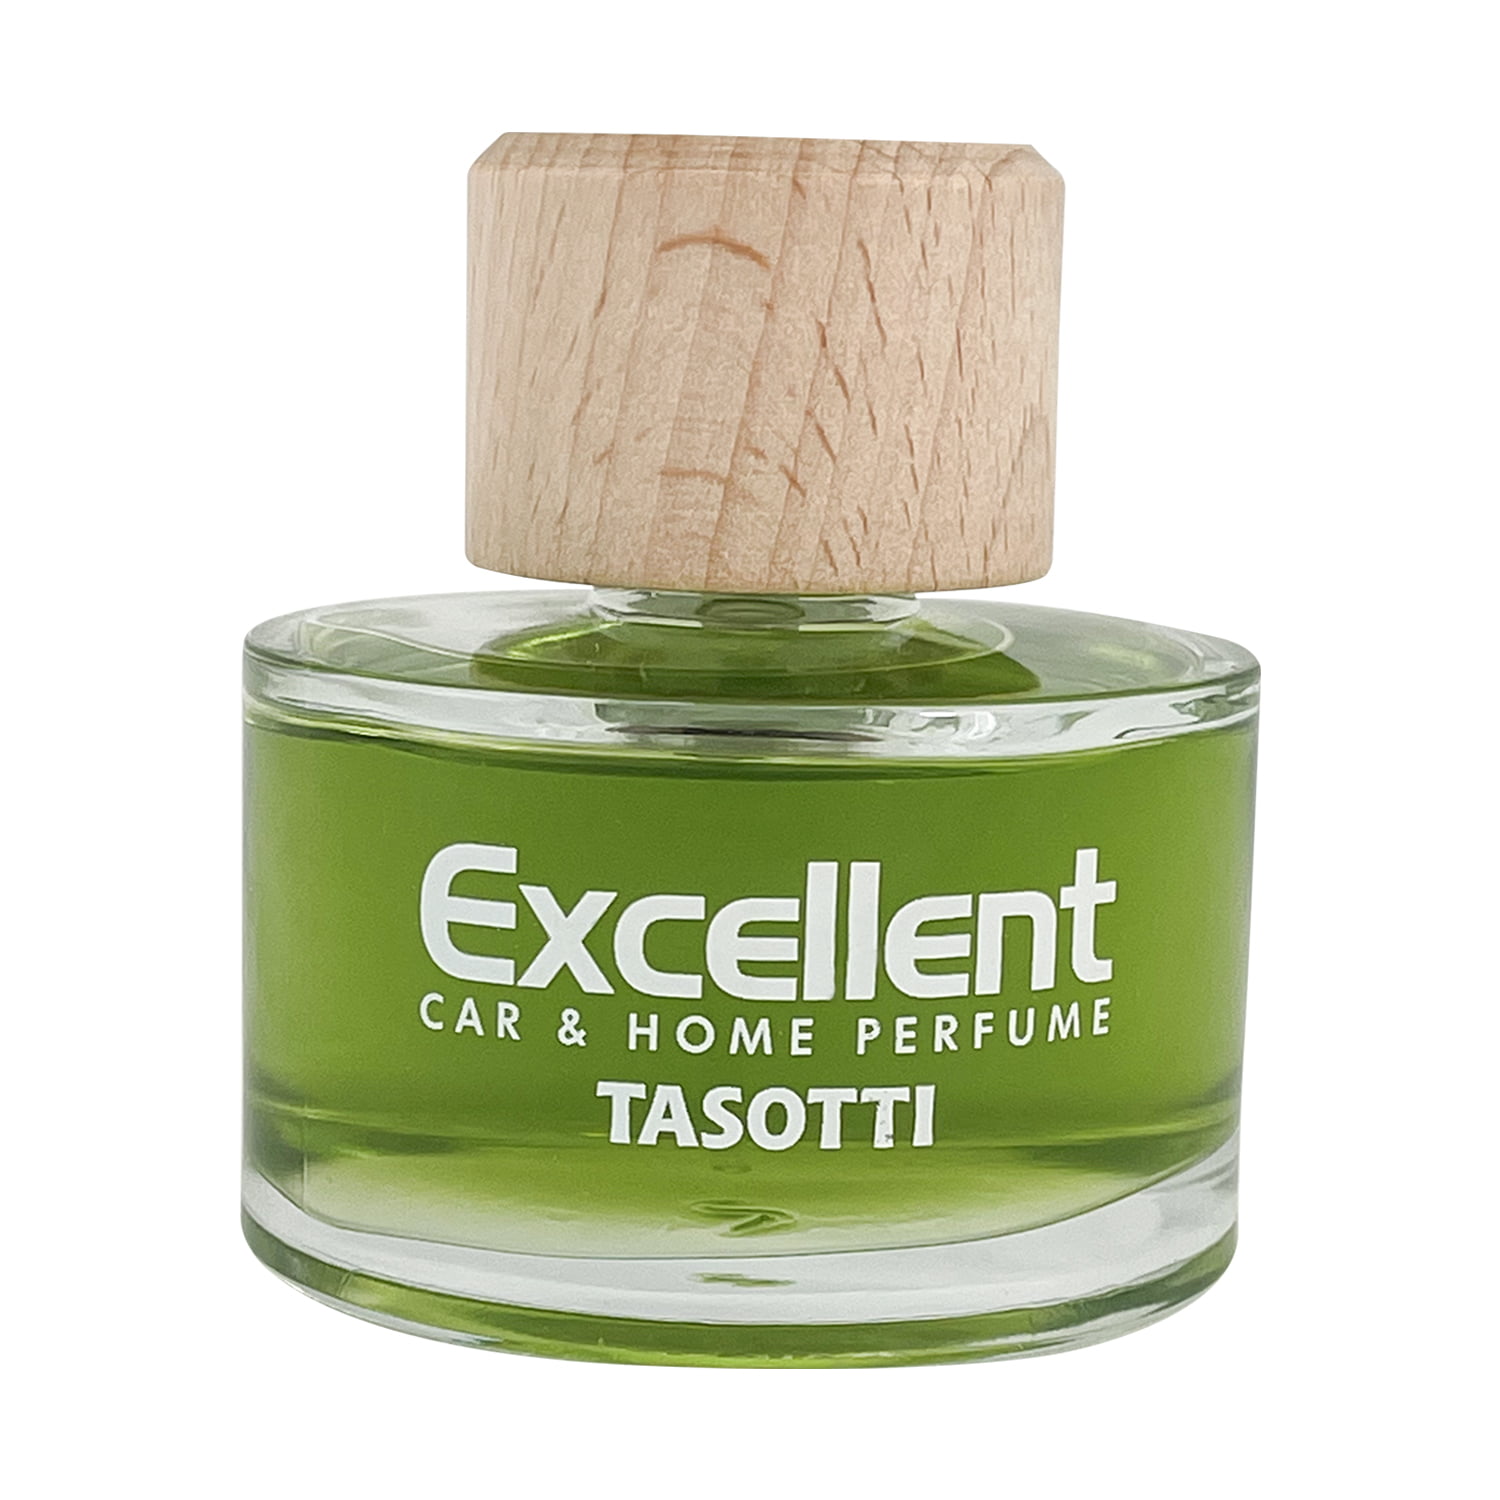 Tasotti Excellent Car Perfume Air Freshener, Luxury Car Air fresheners and  Car Odor Eliminator, Long Lasting Scent Up to 75 Days, Coconut